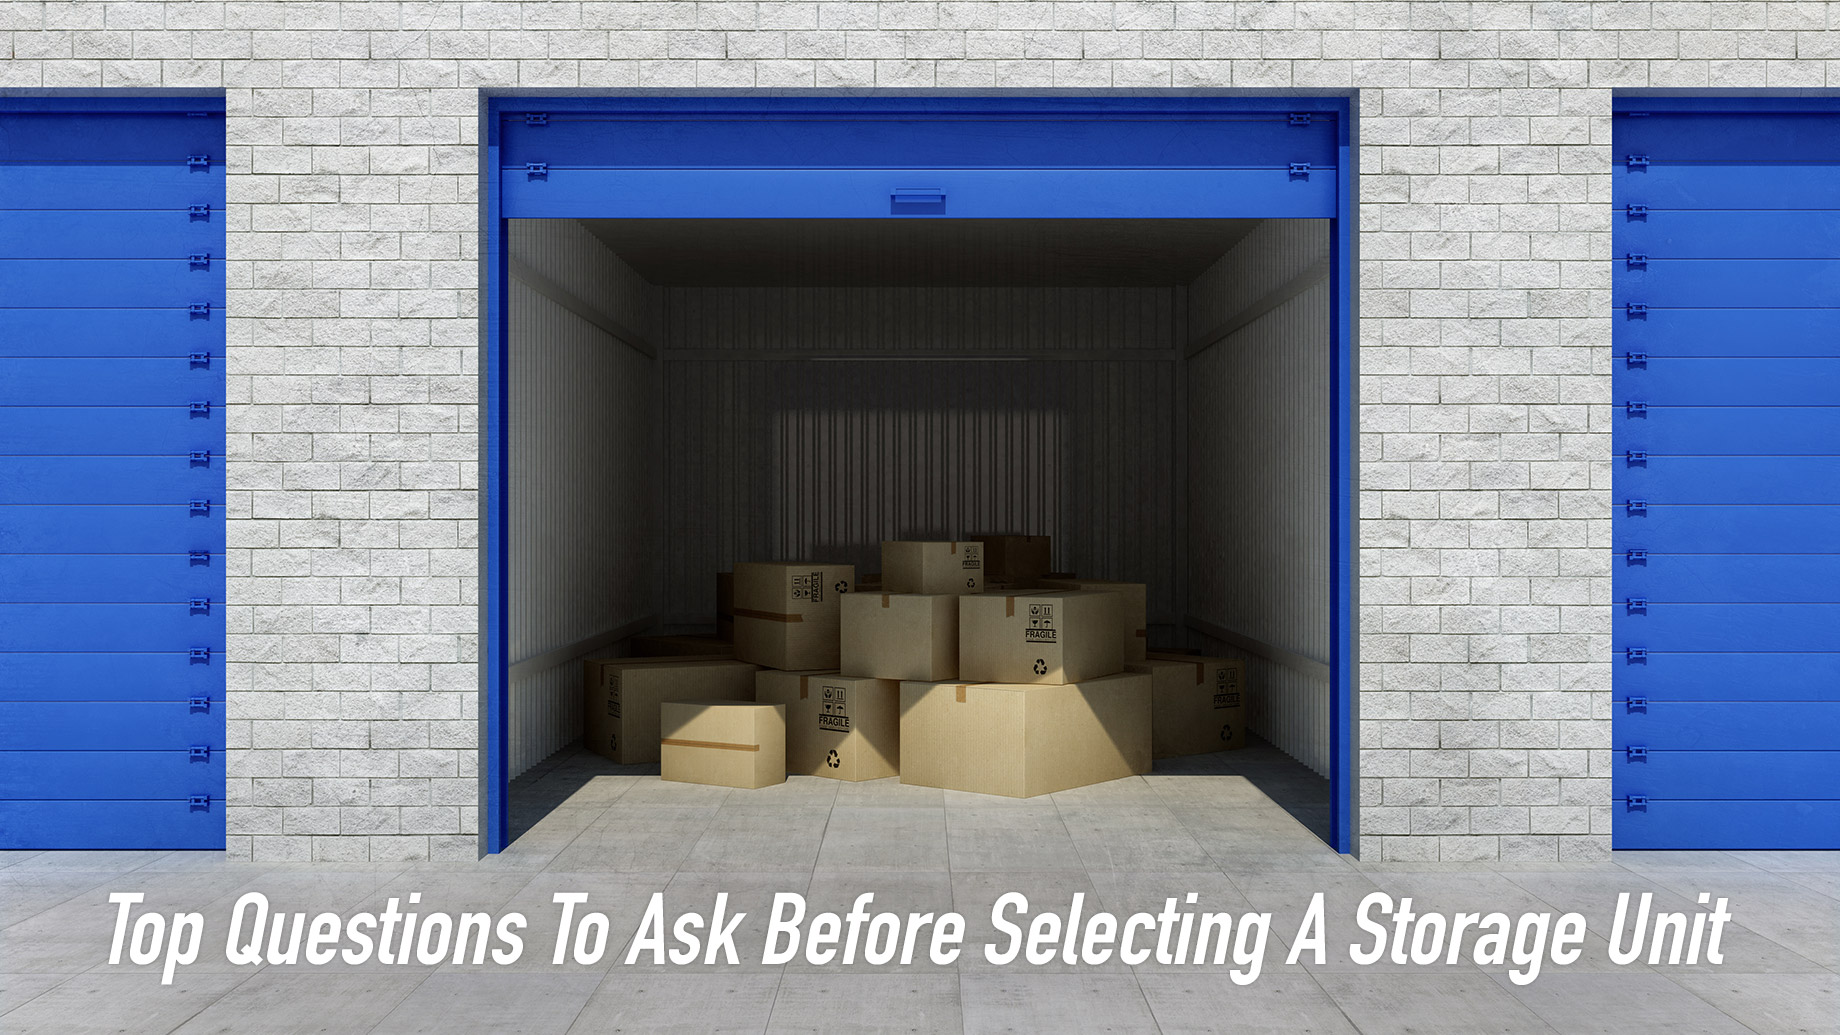 Top Questions To Ask Before Selecting A Storage Unit